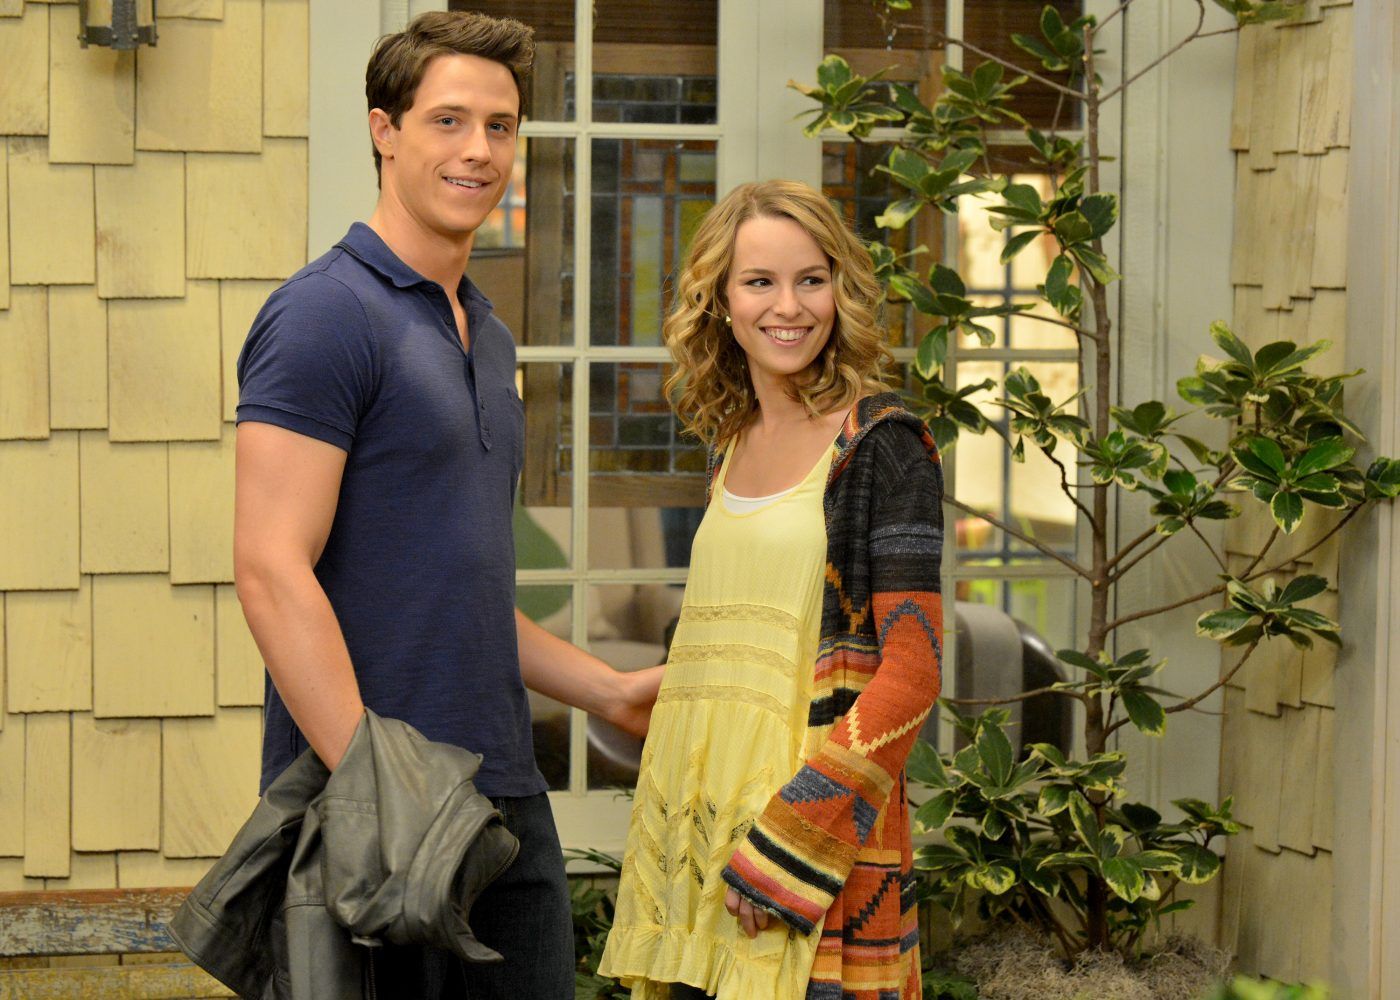 10 Disney Channel Stars Who Dated In Real Life (And 10 Who Are Just Friends)